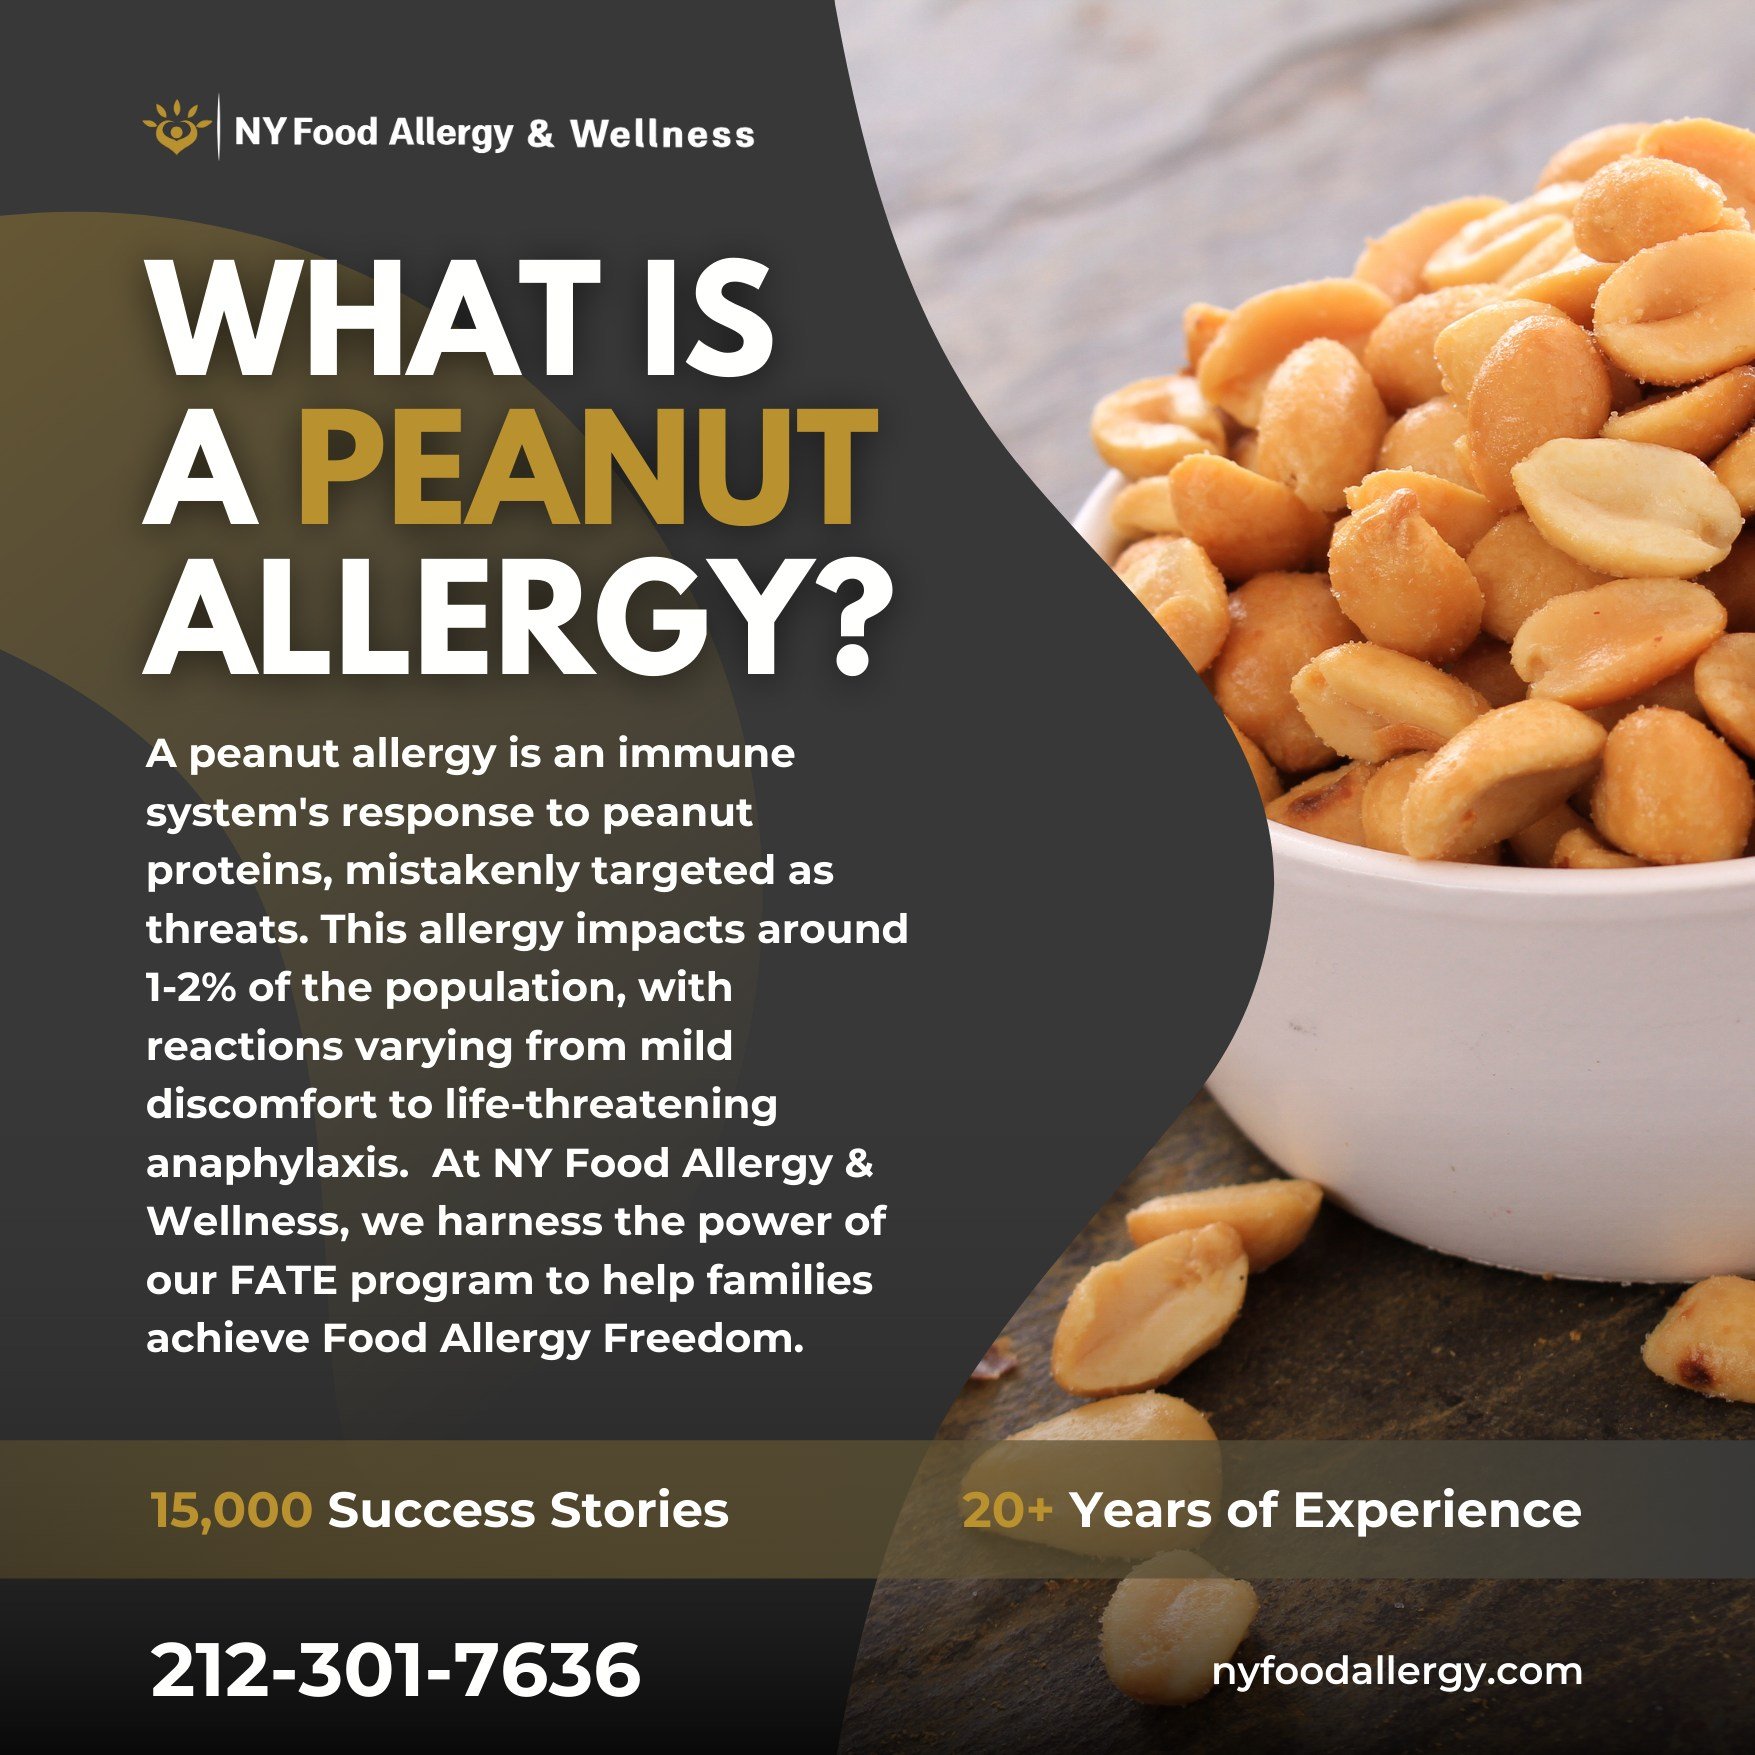 A peanut allergy is not just common, it&rsquo;s one of the most severe, with the power to cause acute reactions from the smallest exposure. This condition touches 1-2% of the population, standing as a testament to the crucial need for precise managem